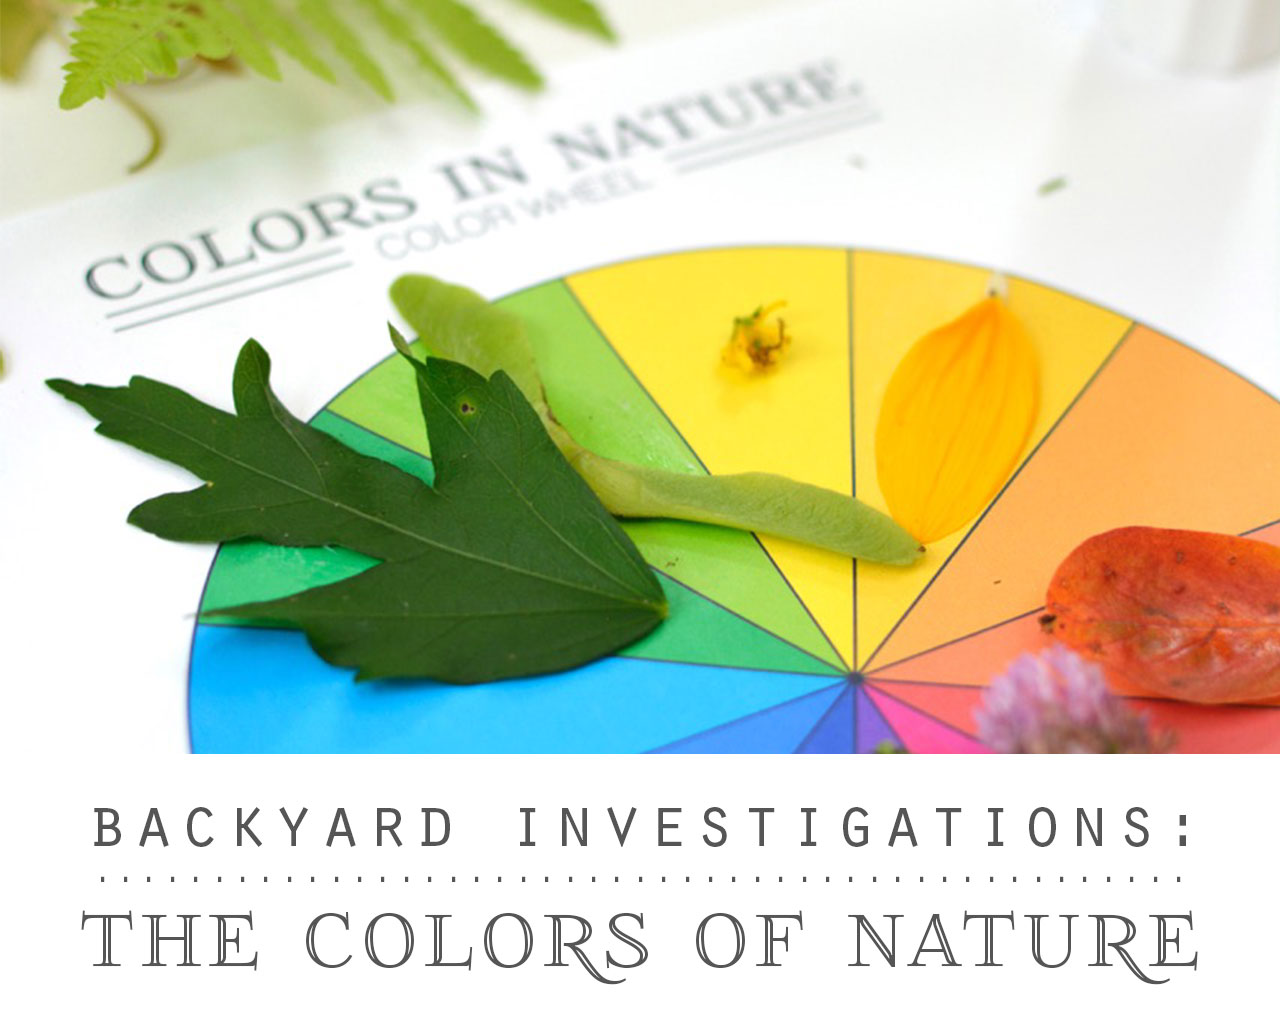 Backyard Investigations: The Colors of Nature